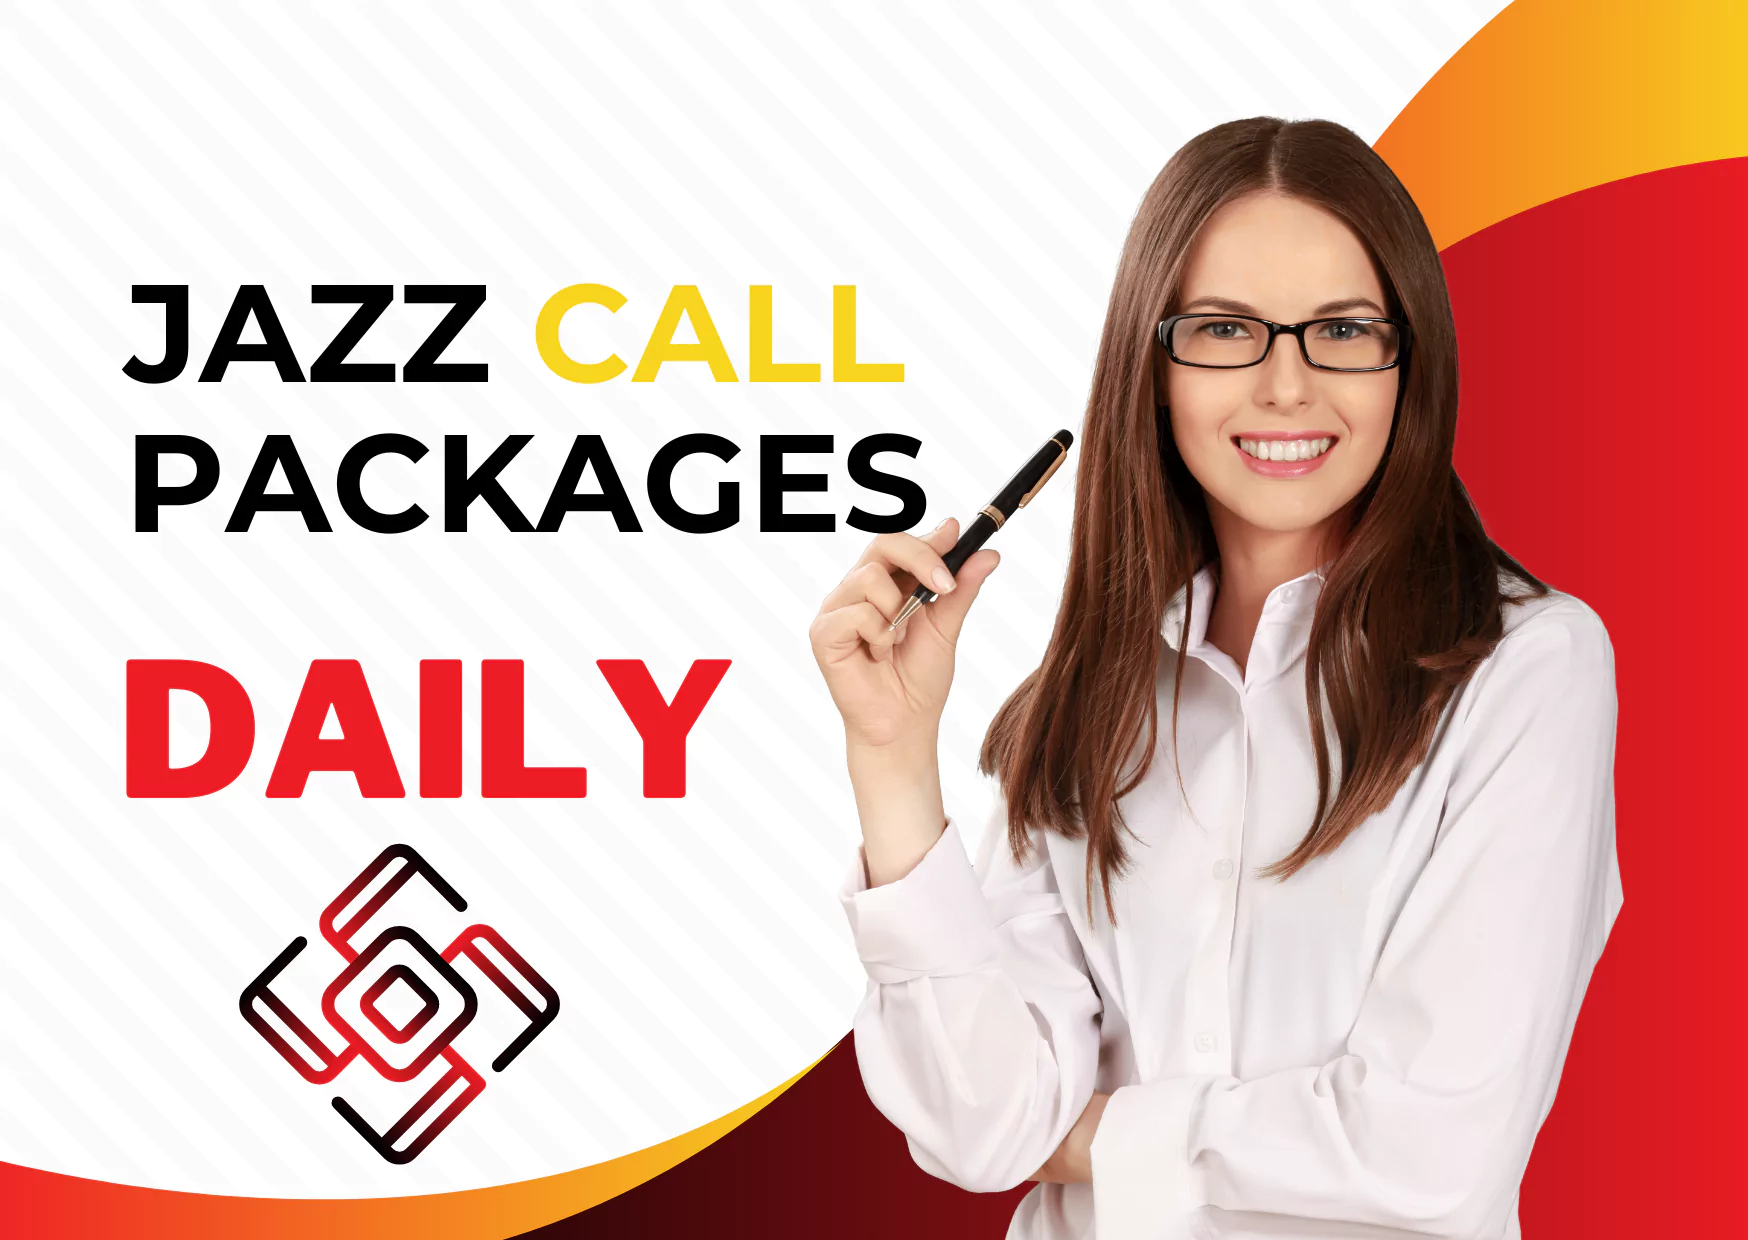 Jazz Call Packages 24 Hours Code